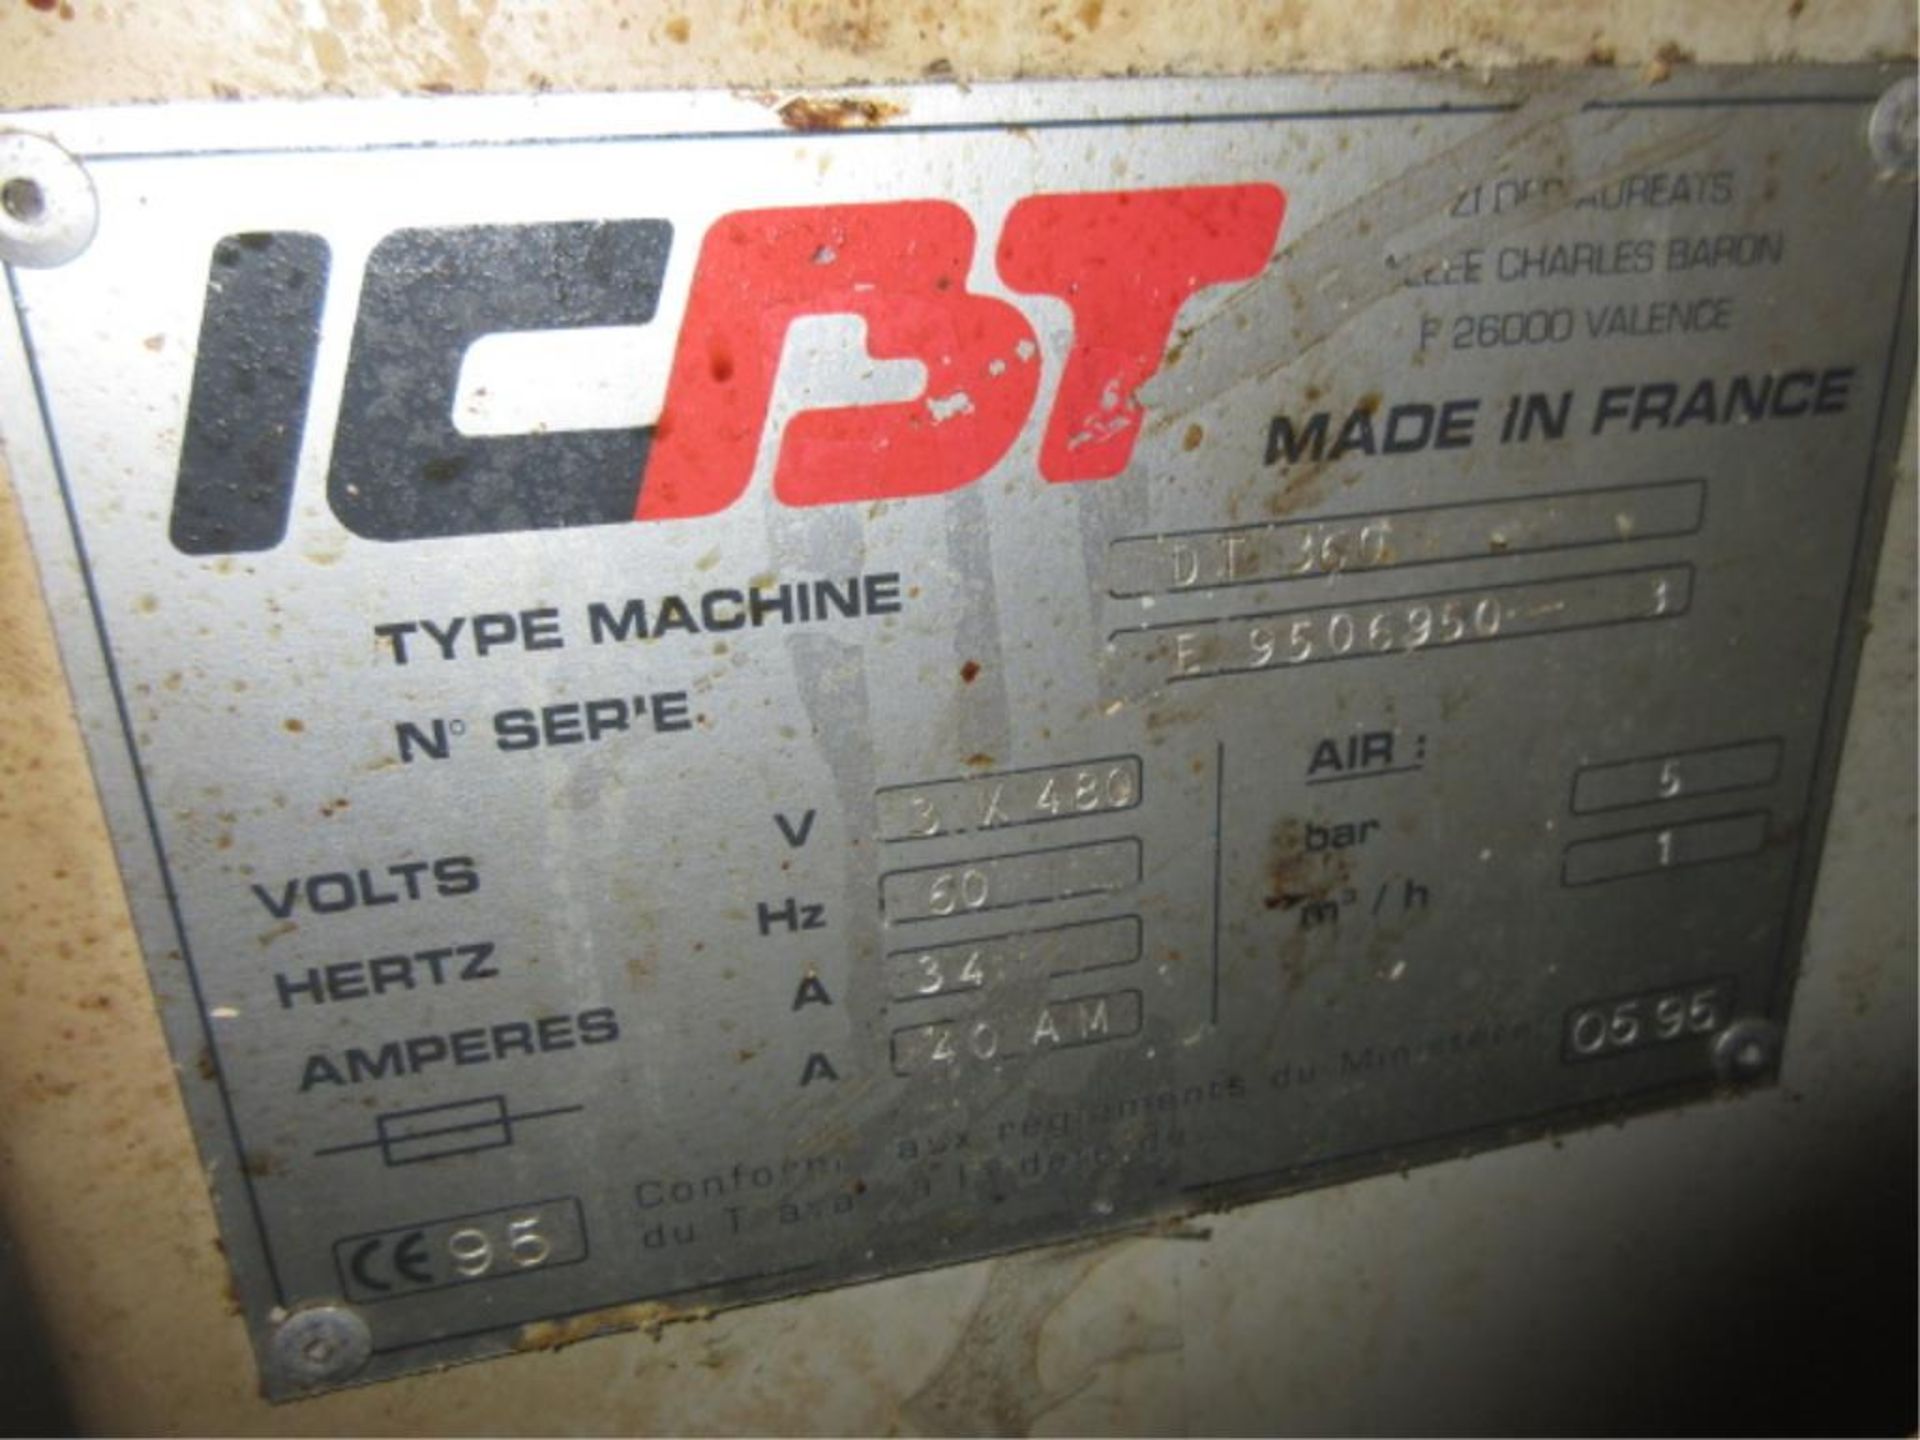 ICBT DT360 2X1 Twister, (1995), 144 spindles, can run with oil trough, said to be in running - Image 9 of 9